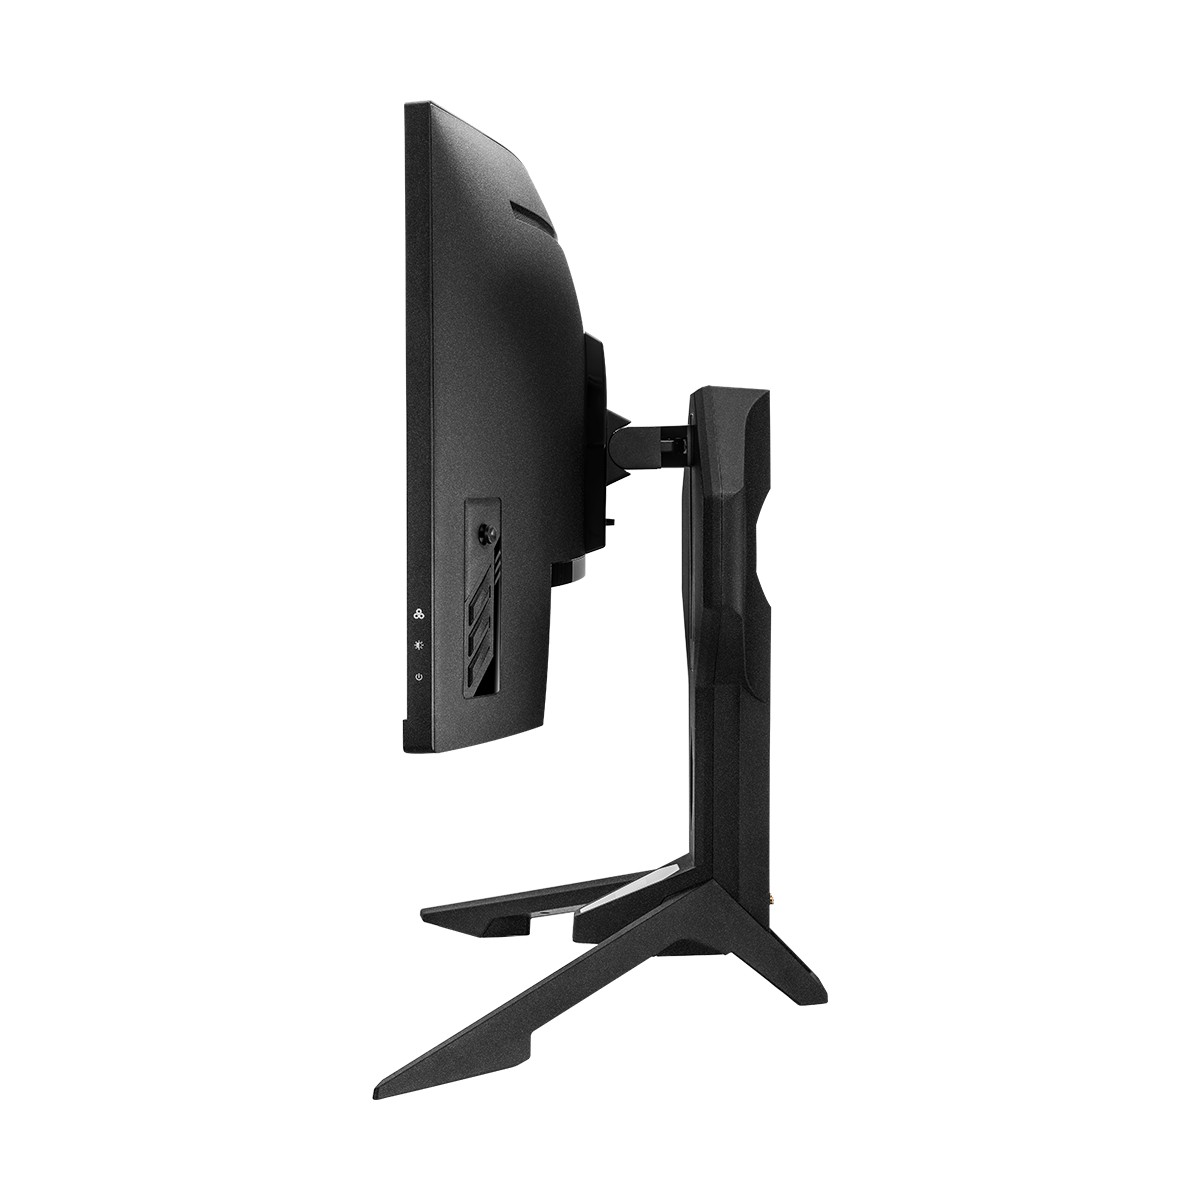 Asrock 34" PG34WQ15R3A 3440x1440 VA 165Hz 1ms FreeSync HDR 400 Ultrawide Curved Gaming Monitor